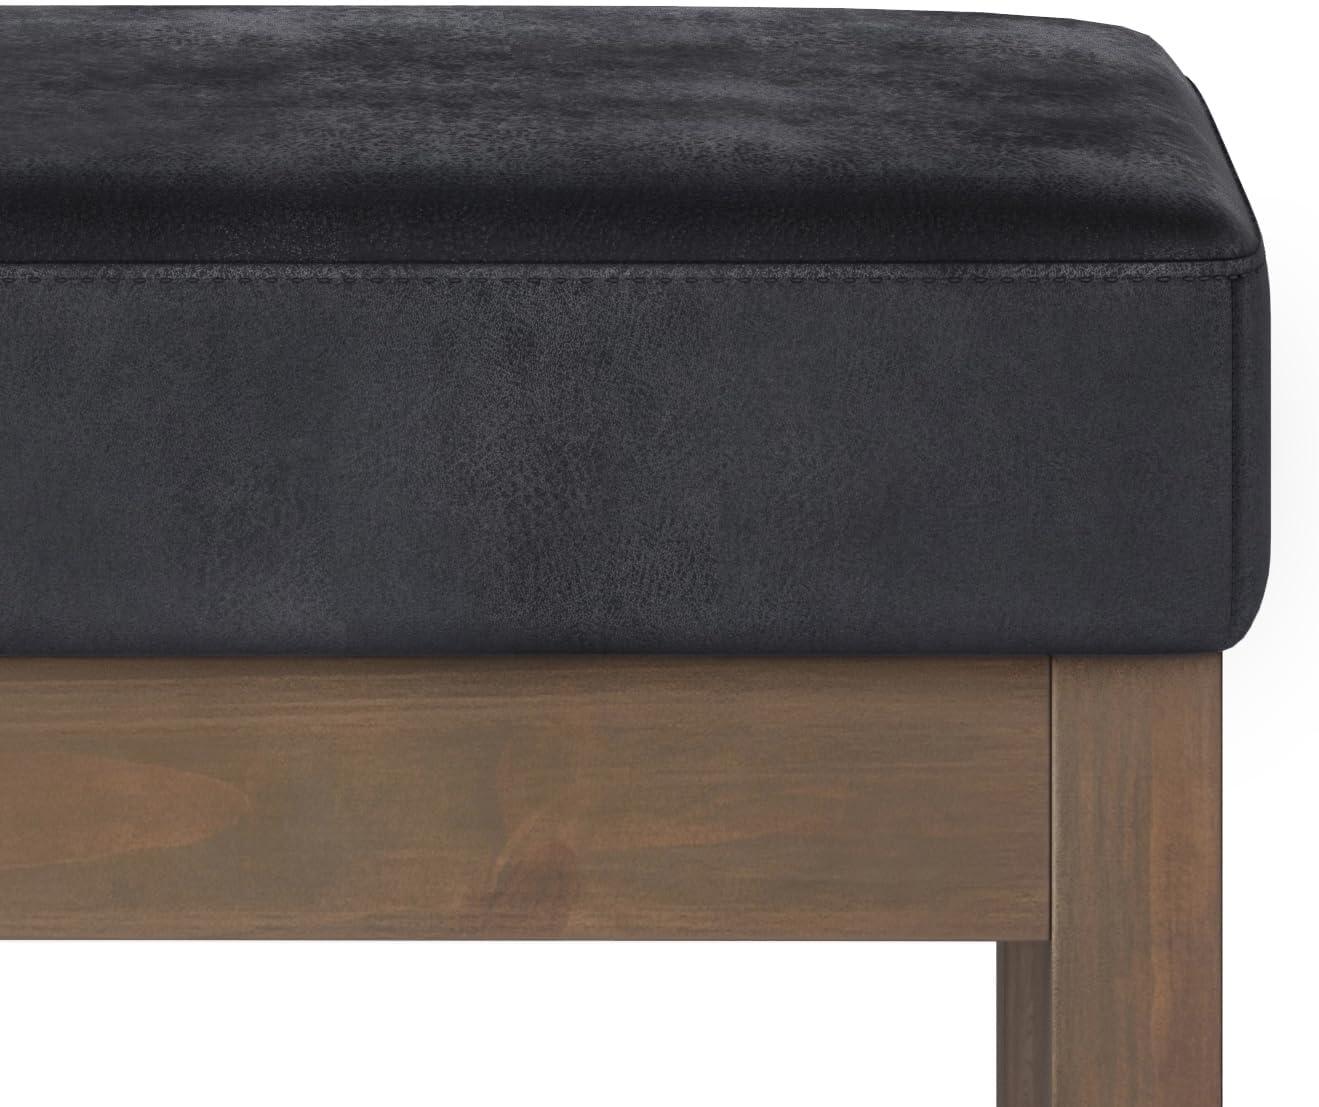 Milltown Distressed Black Faux Leather Contemporary Footstool Ottoman